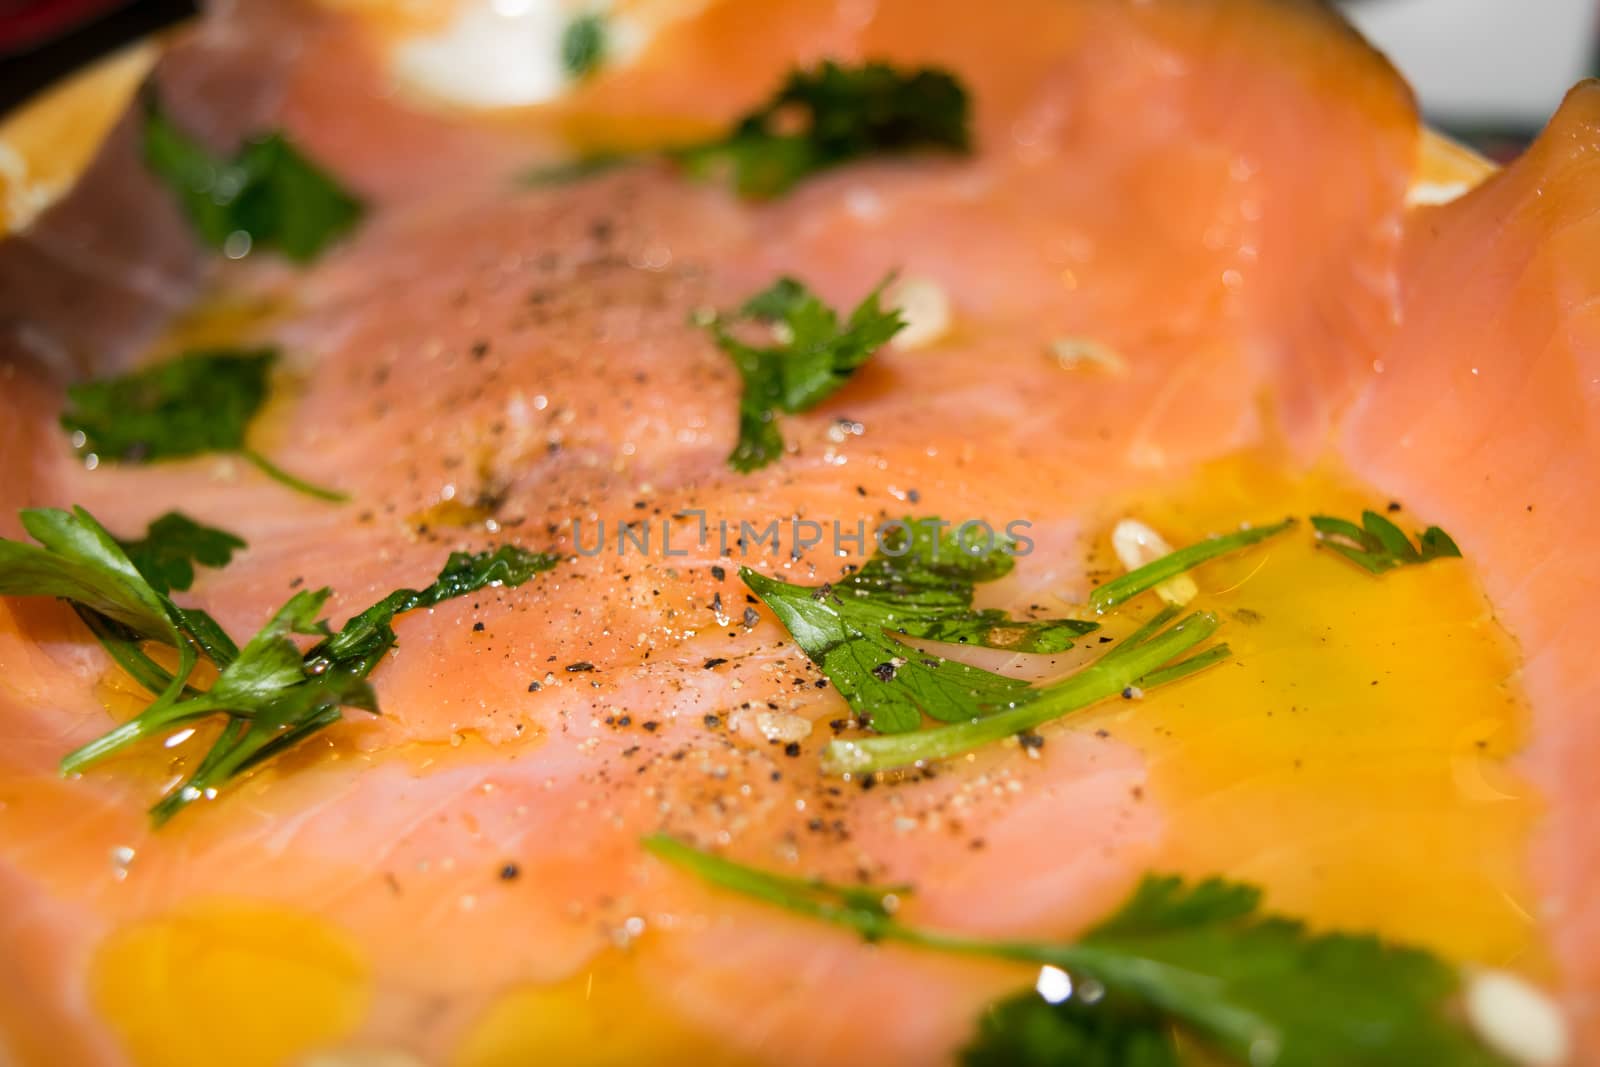 Smoked salmon seasoned with lemon and spices